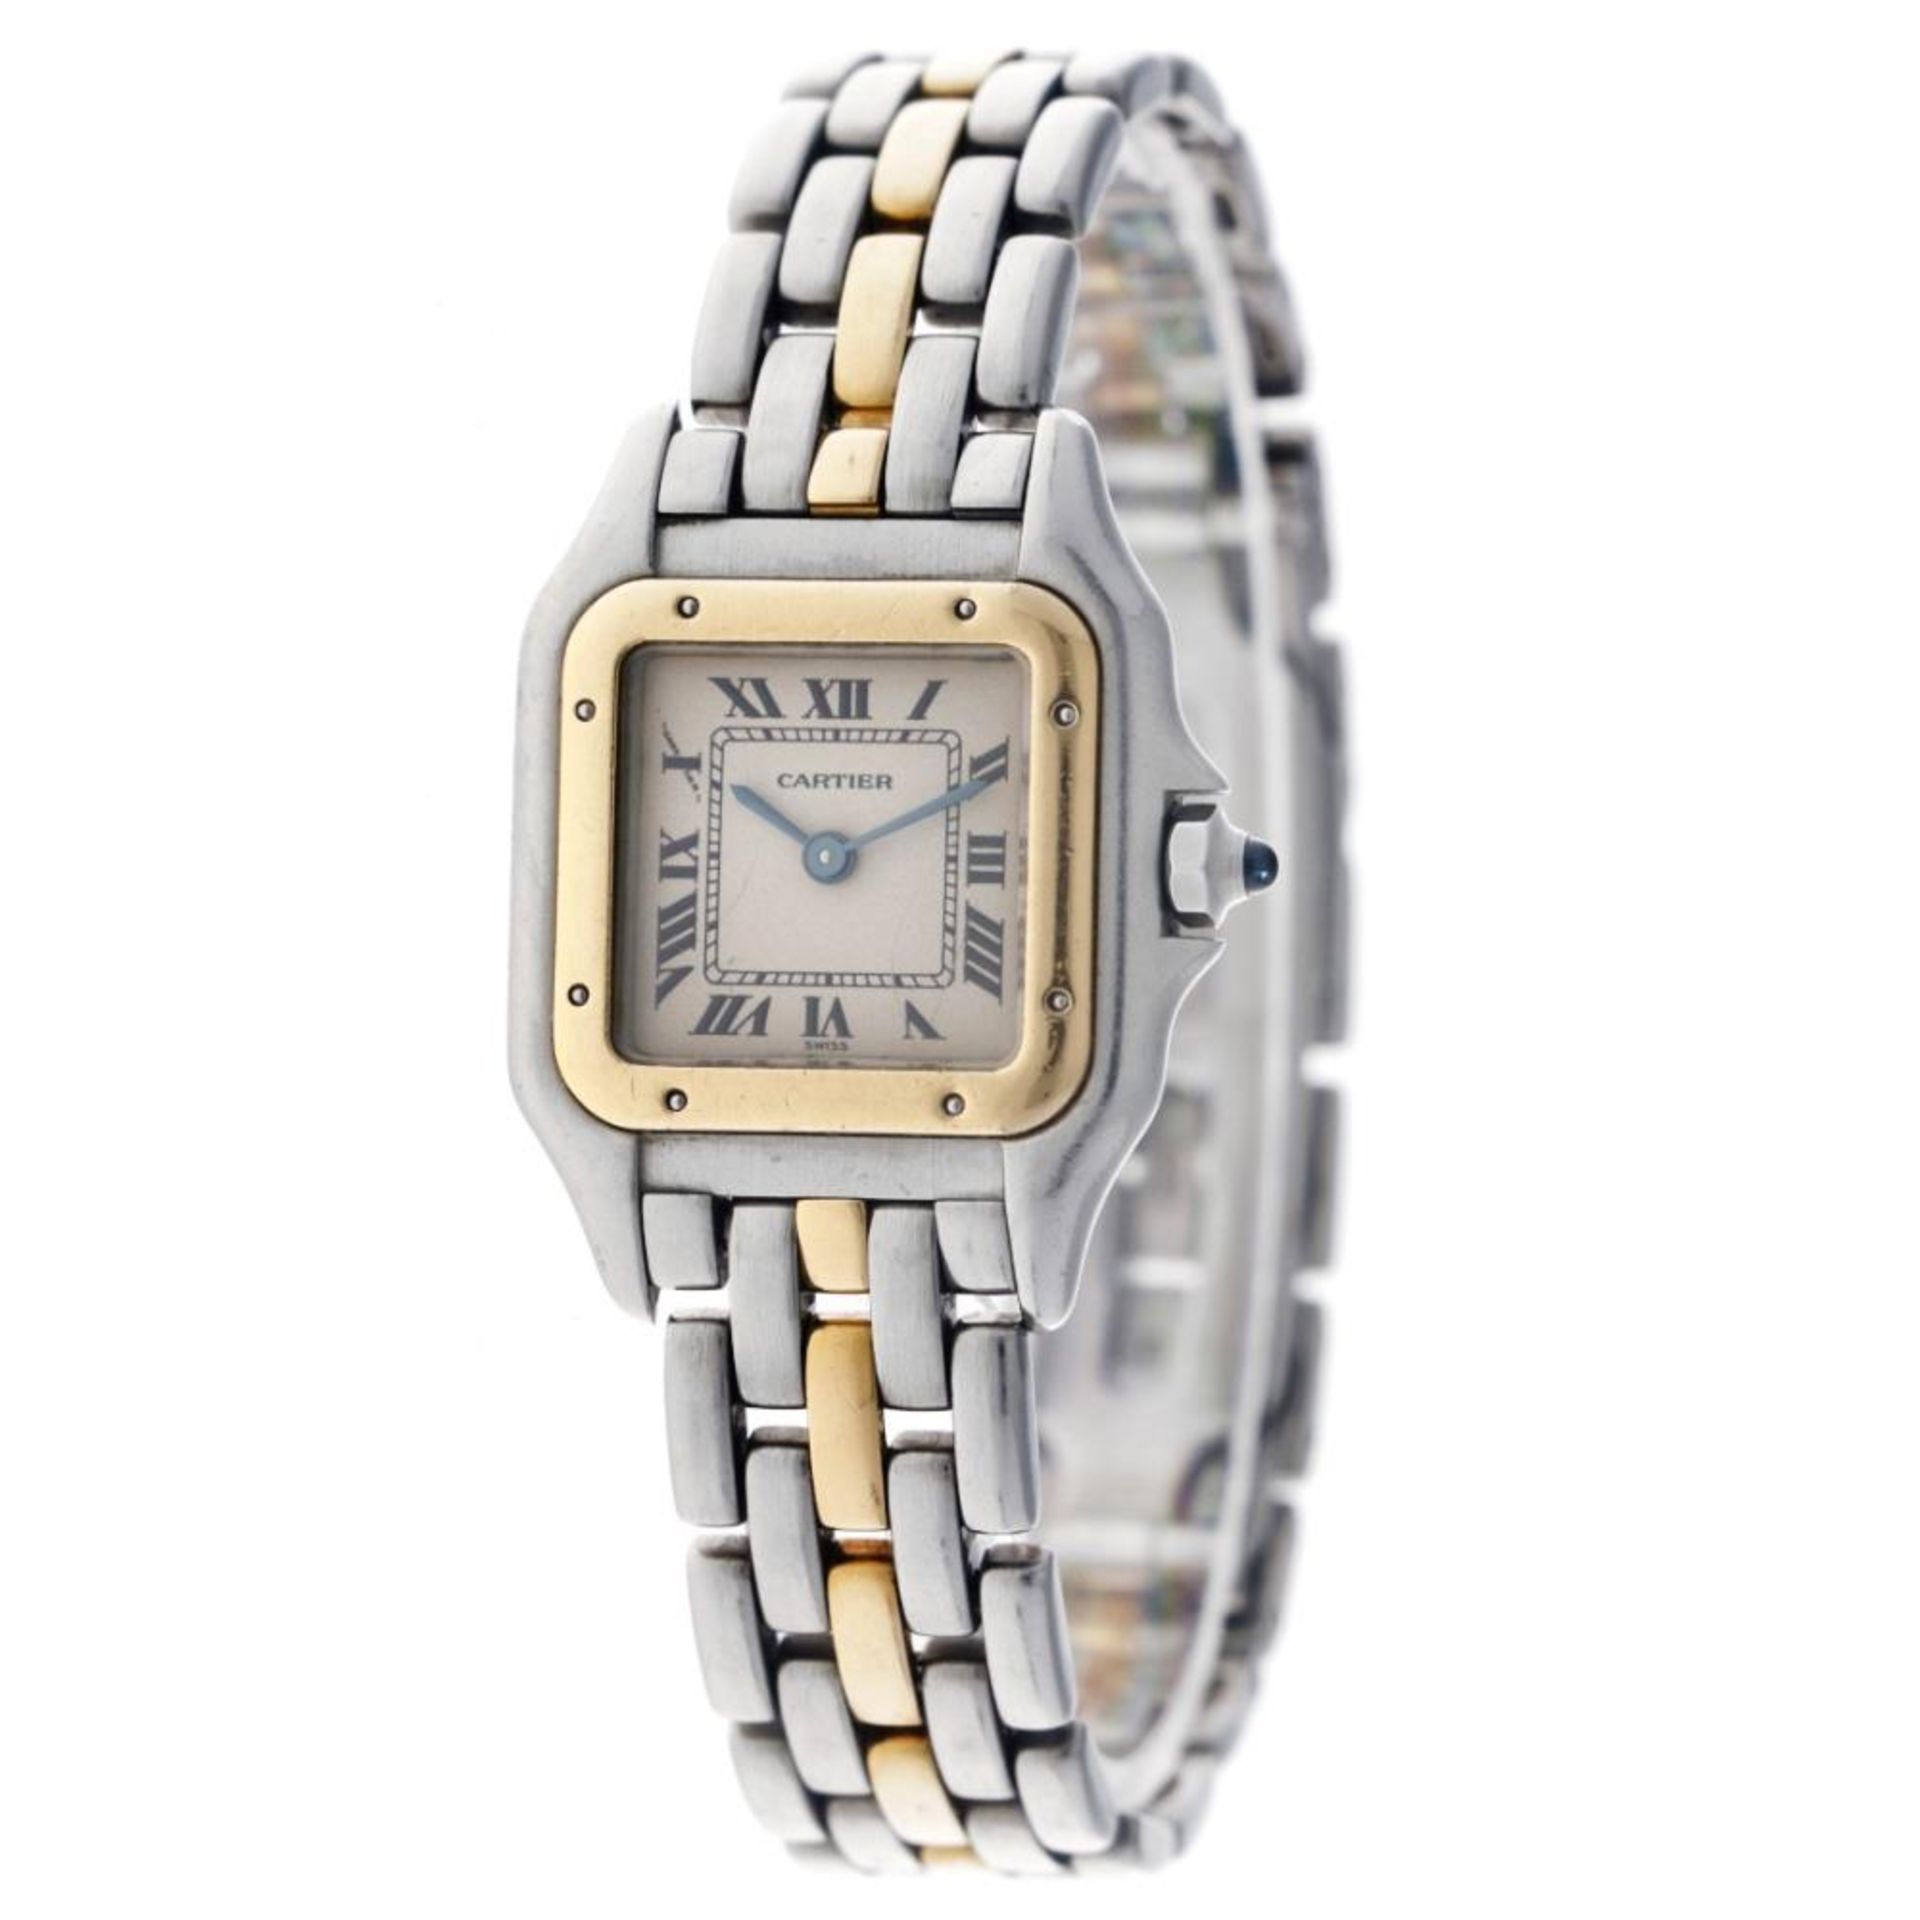 Cartier Panthere 166921 - Ladies watch - approx. 1989. - Image 3 of 12